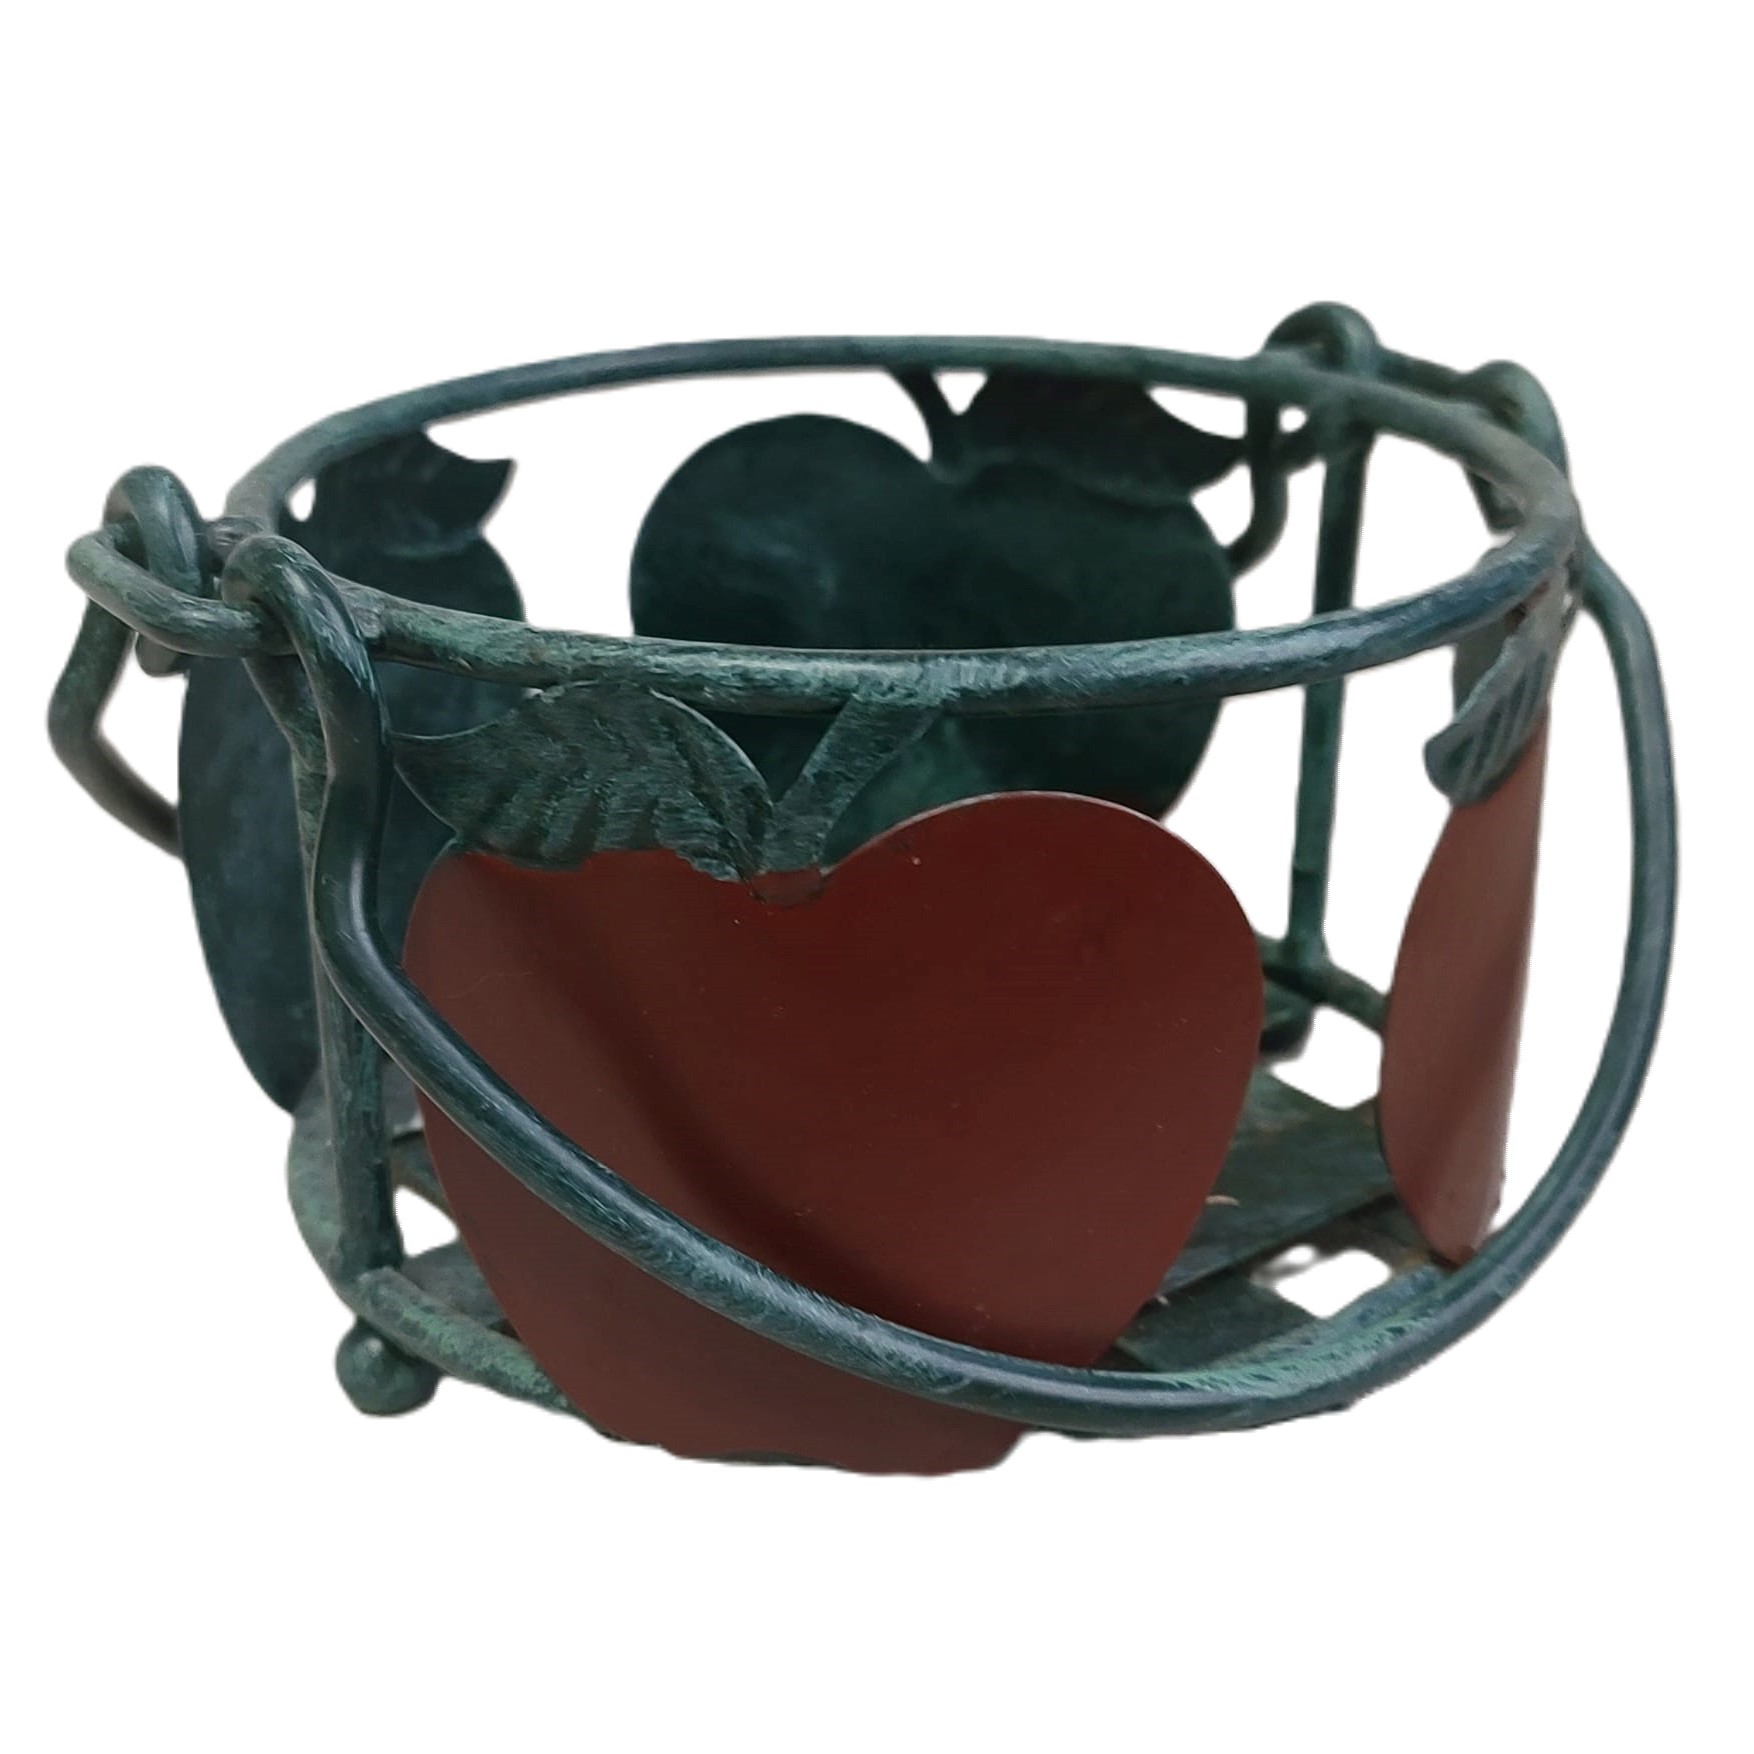 Hand Painted Apple Design Solid Metal Basket - Heavy in weight